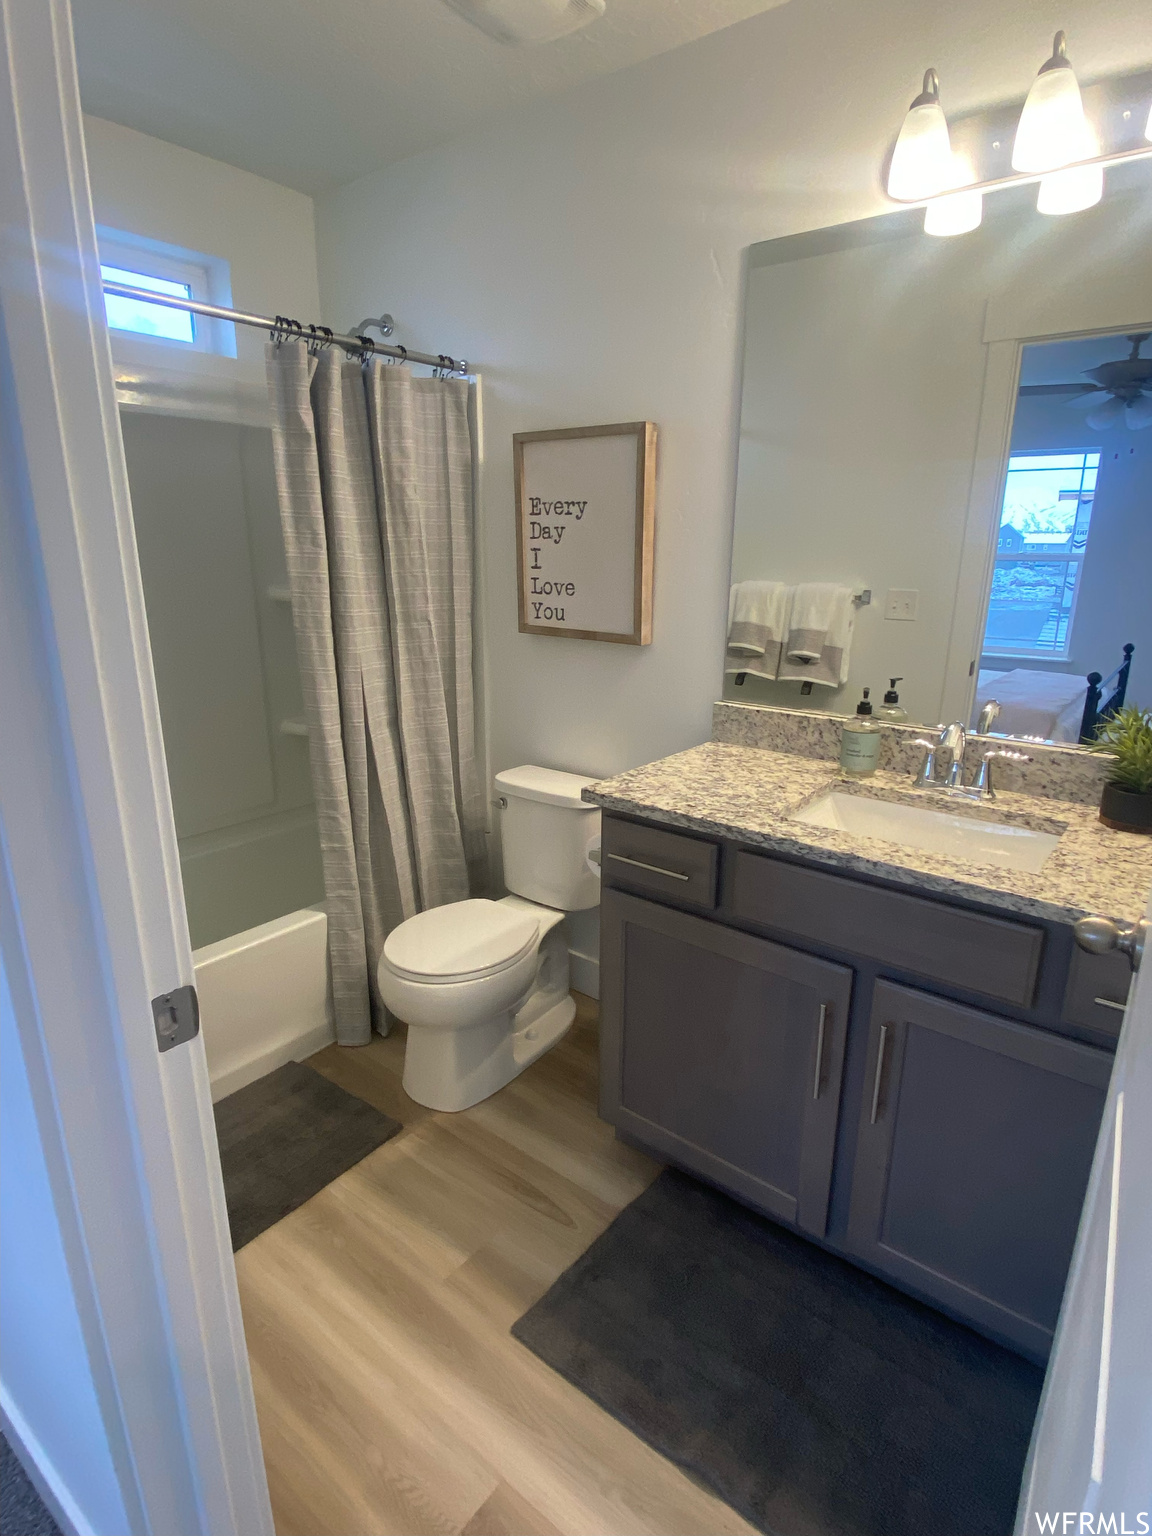 Full bathroom featuring toilet, vanity with extensive cabinet space, ceiling fan, shower / tub combo with curtain, and hardwood / wood-style floors